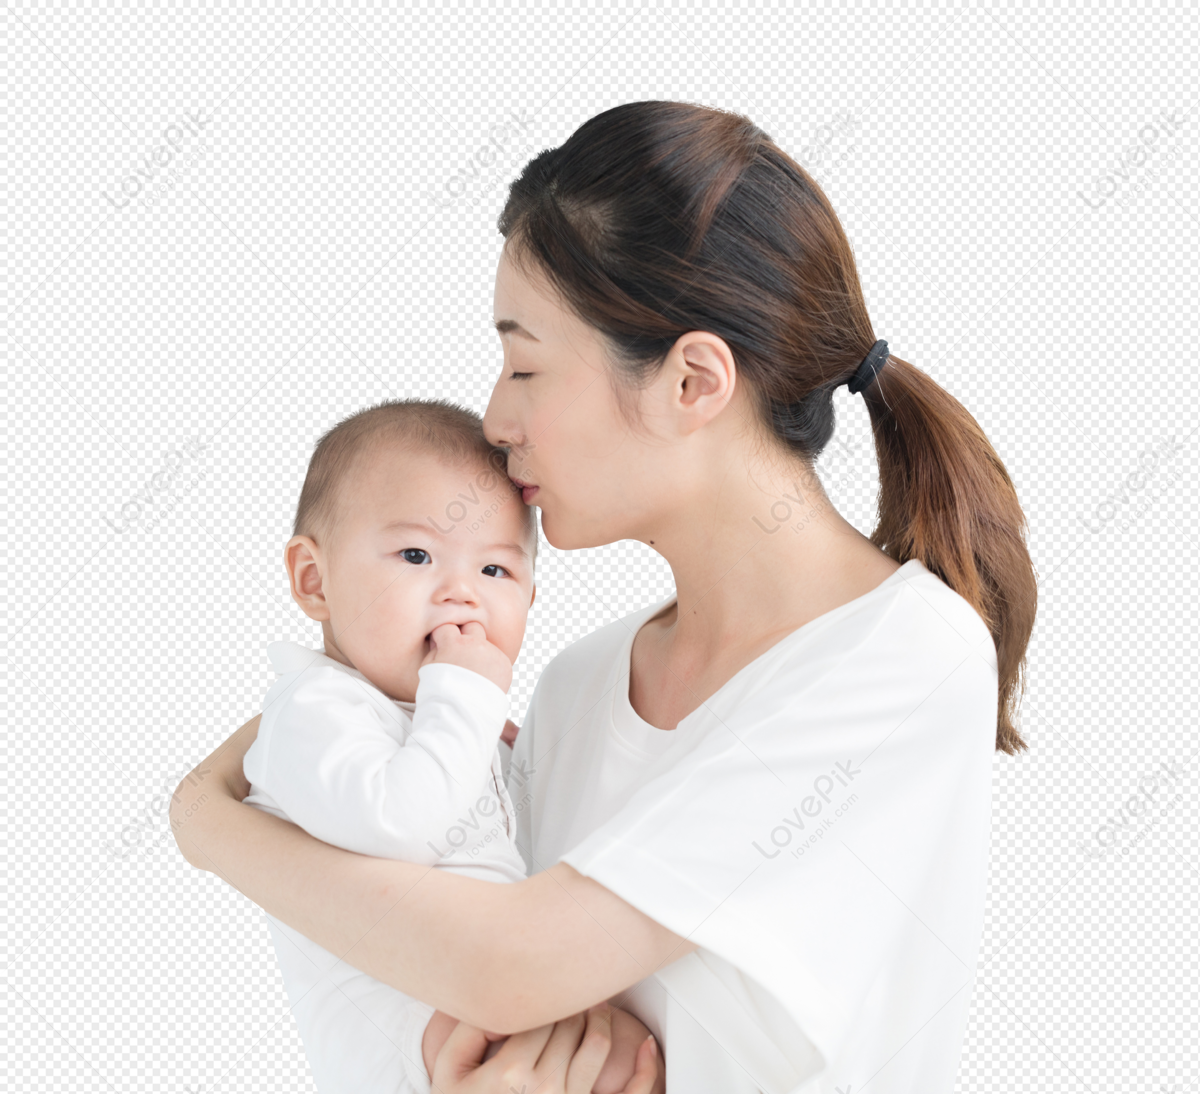 Mother And Baby Mothers Love PNG Transparent Background And ...